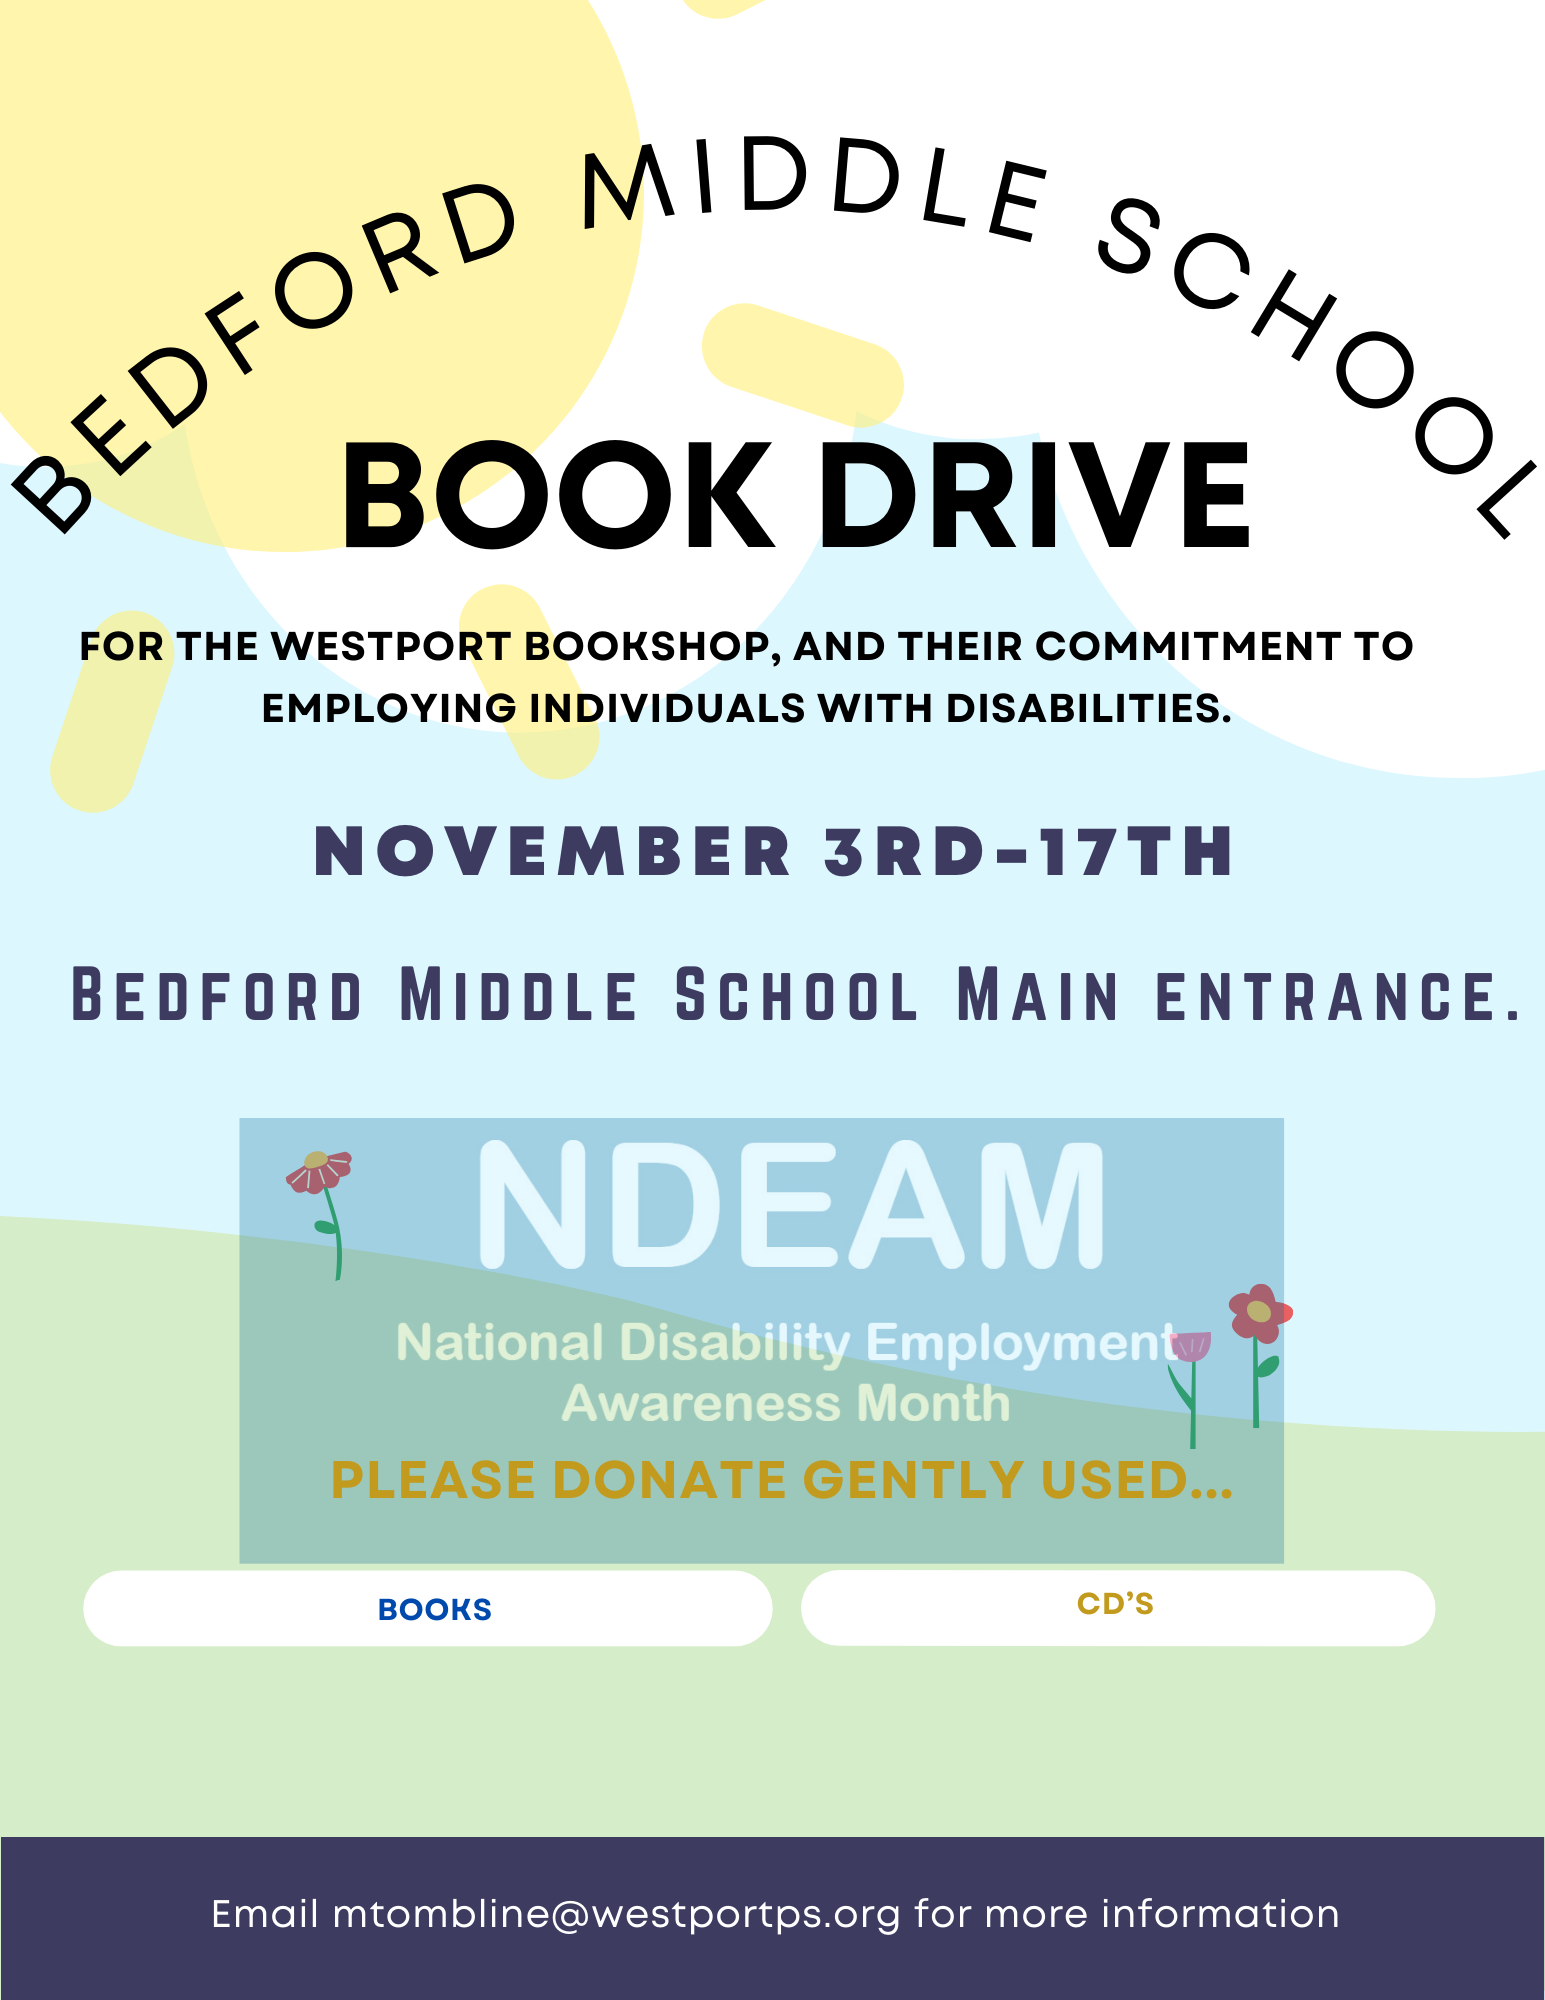 Book Drive at BMS